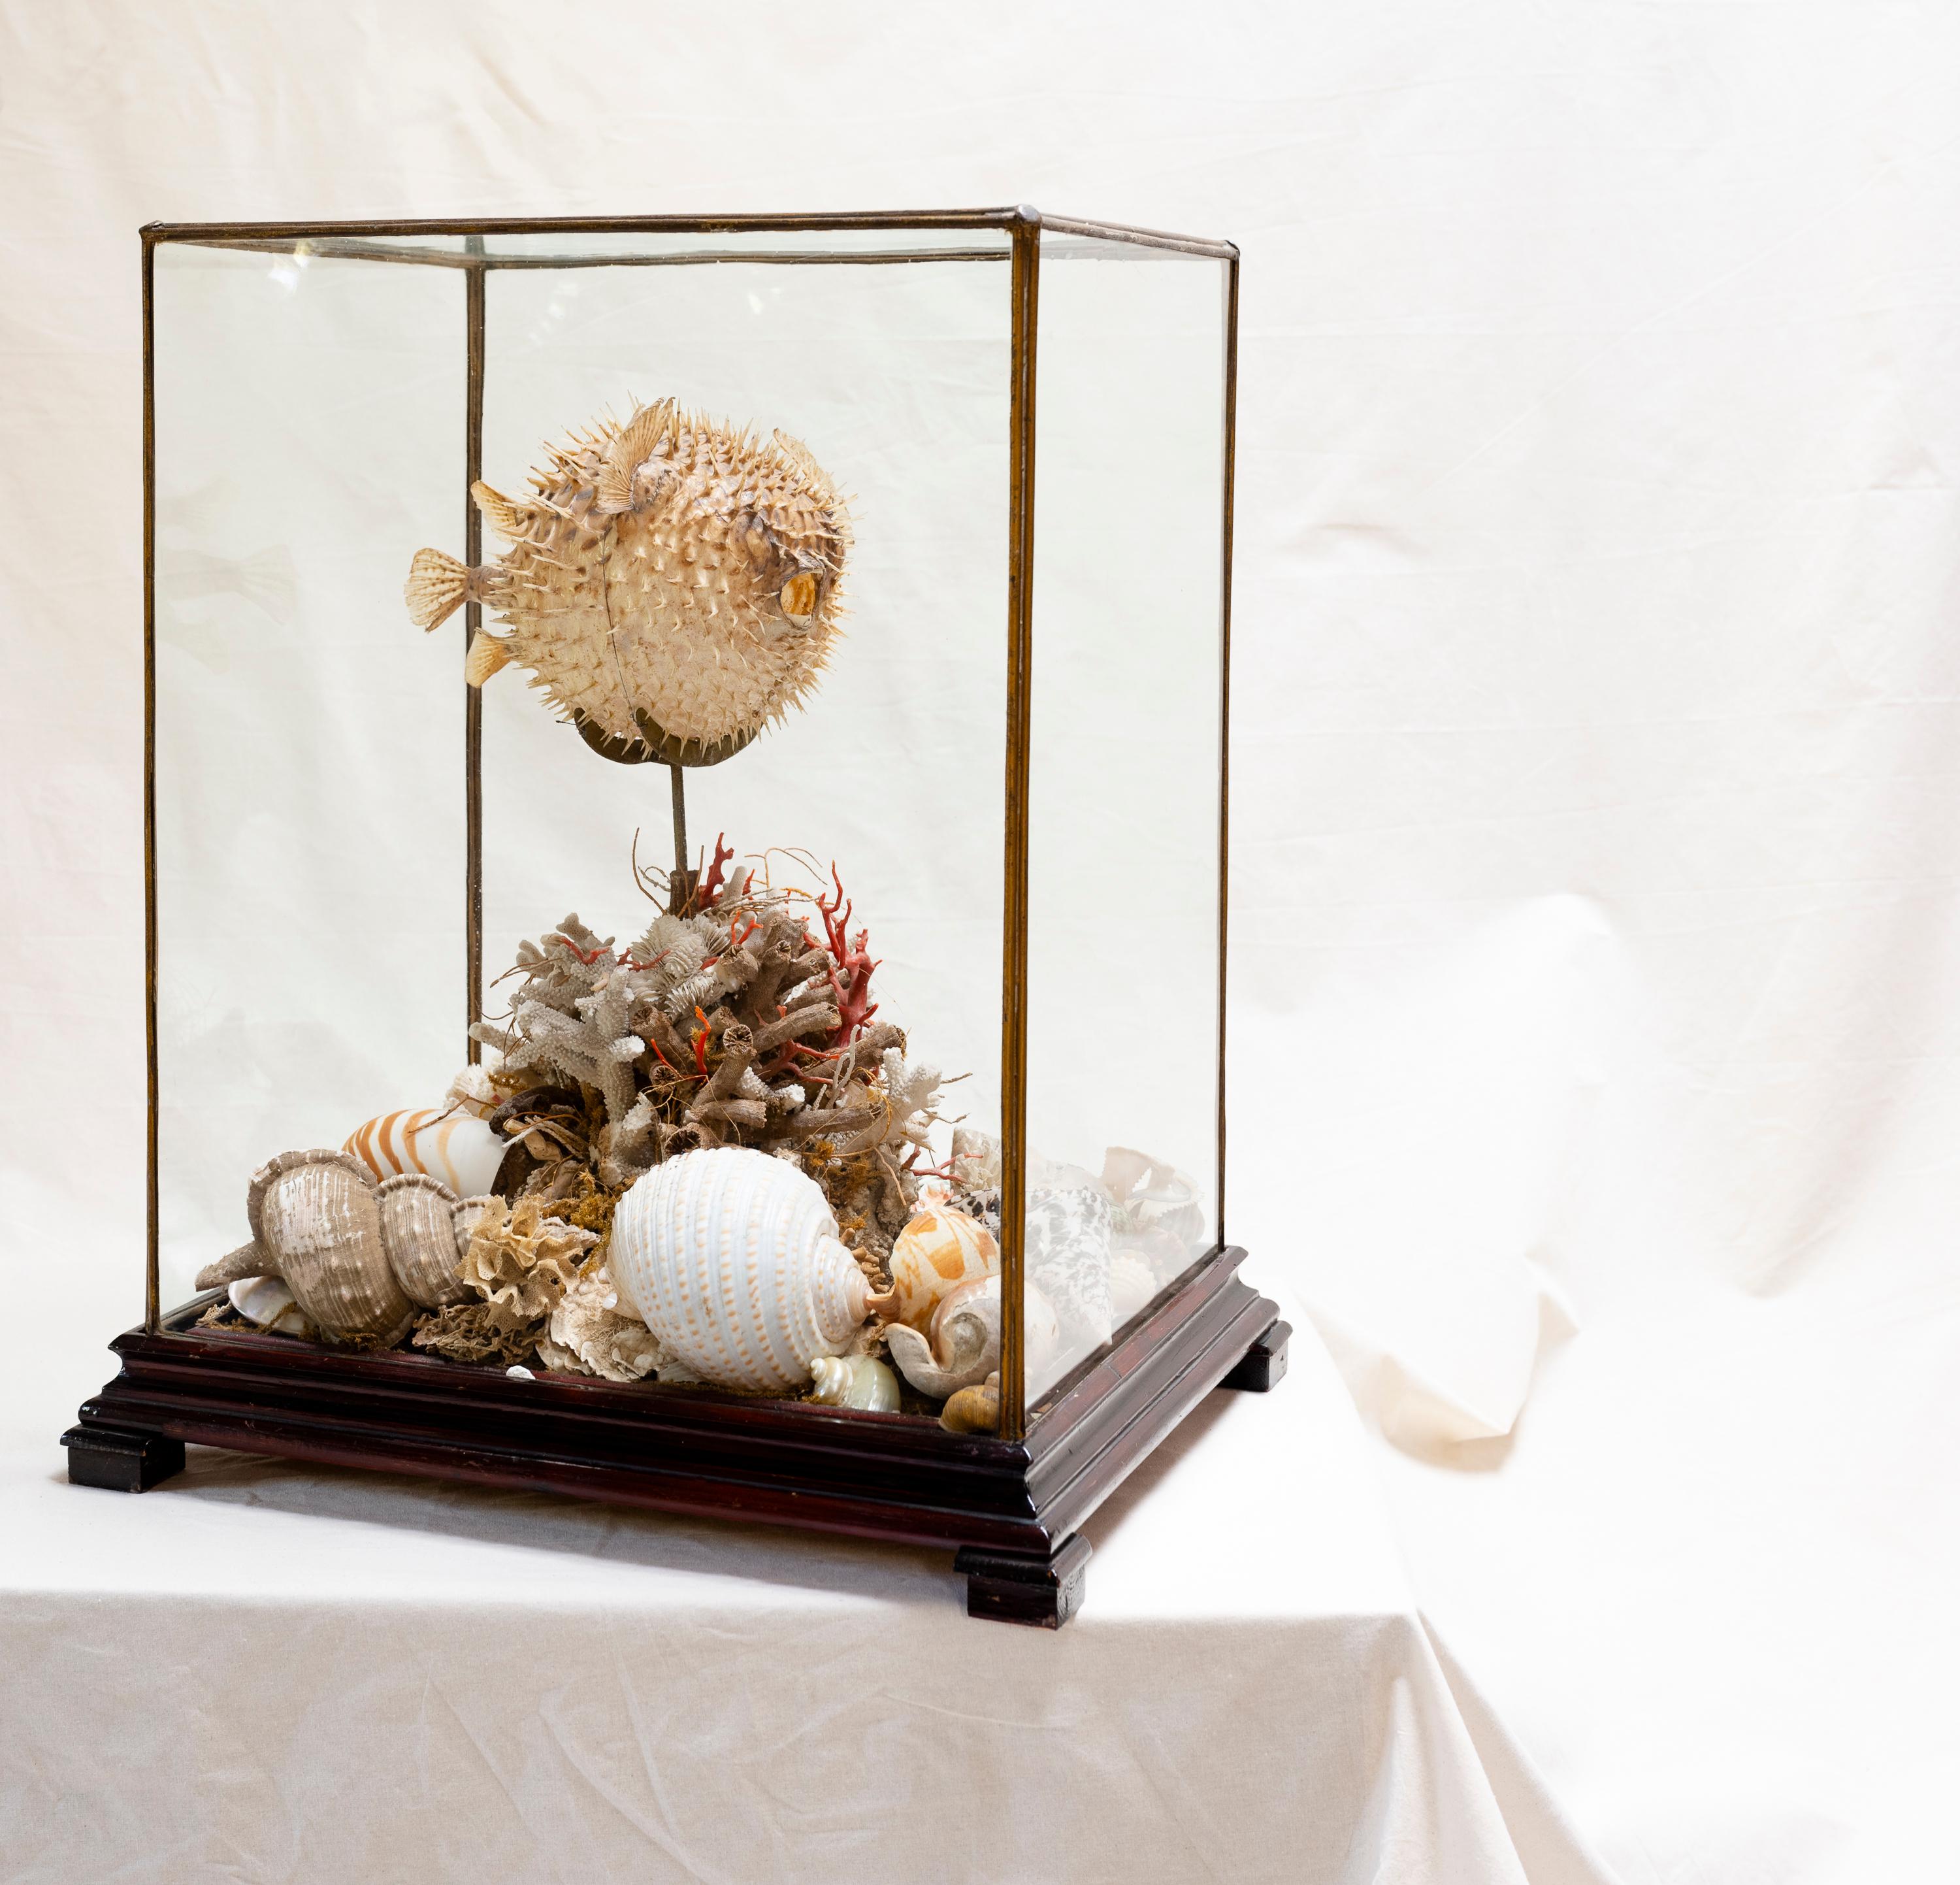 Originally from the Costa Brava in Spain, and brought to America near the turn of the last century, this incredible taxidermy blowfish with shells and Mediterranean sea elements remains in great condition, and will elevate any space. The hand-blown